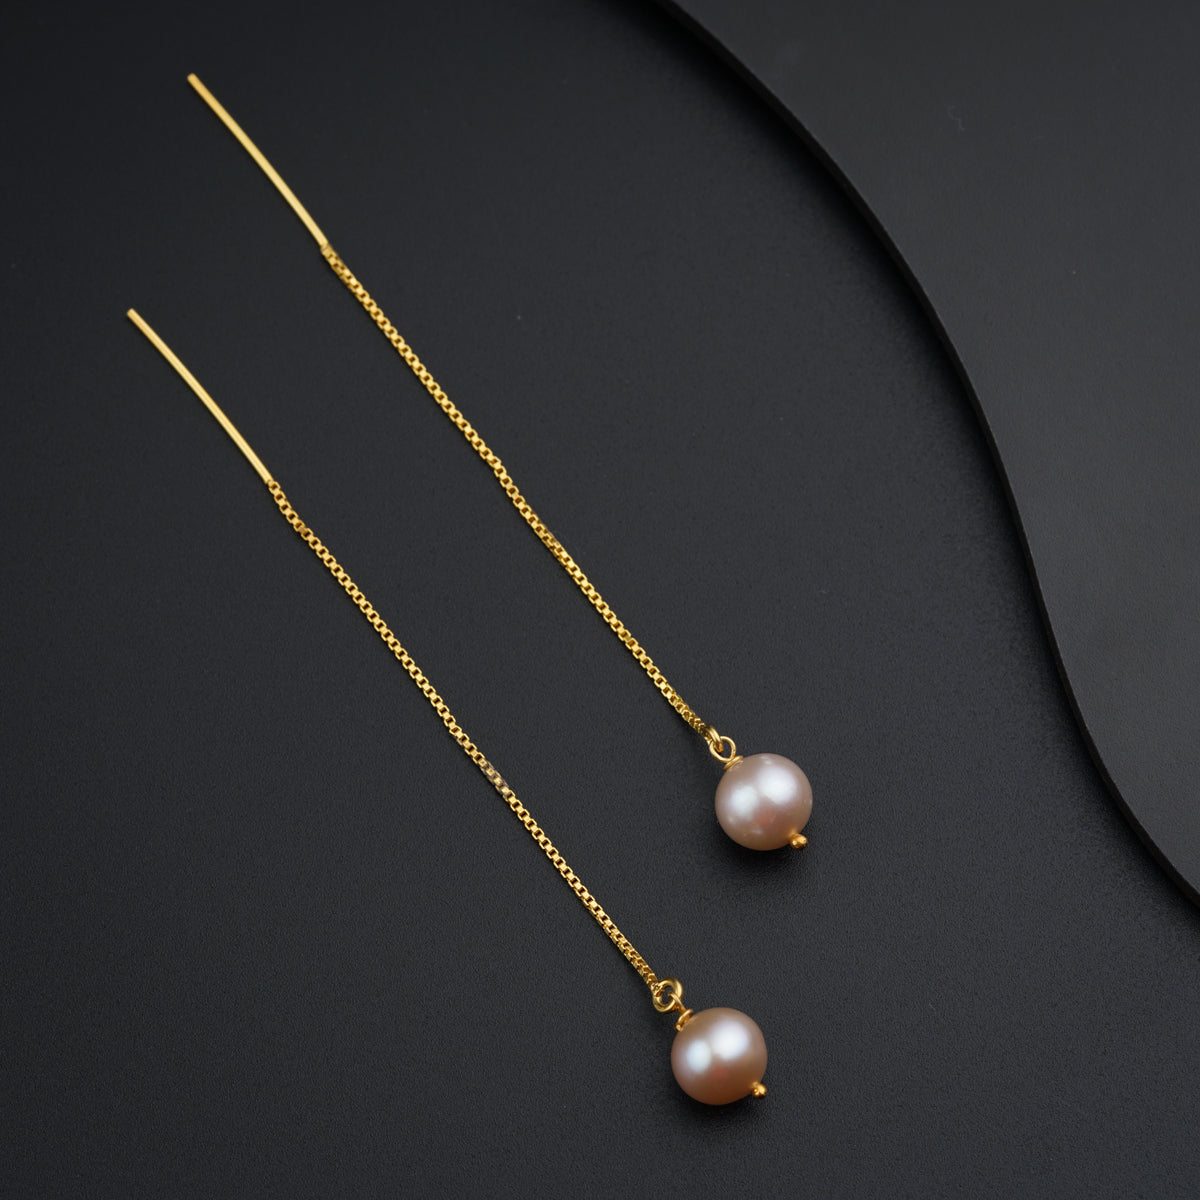 a pair of pearls hanging from a gold chain